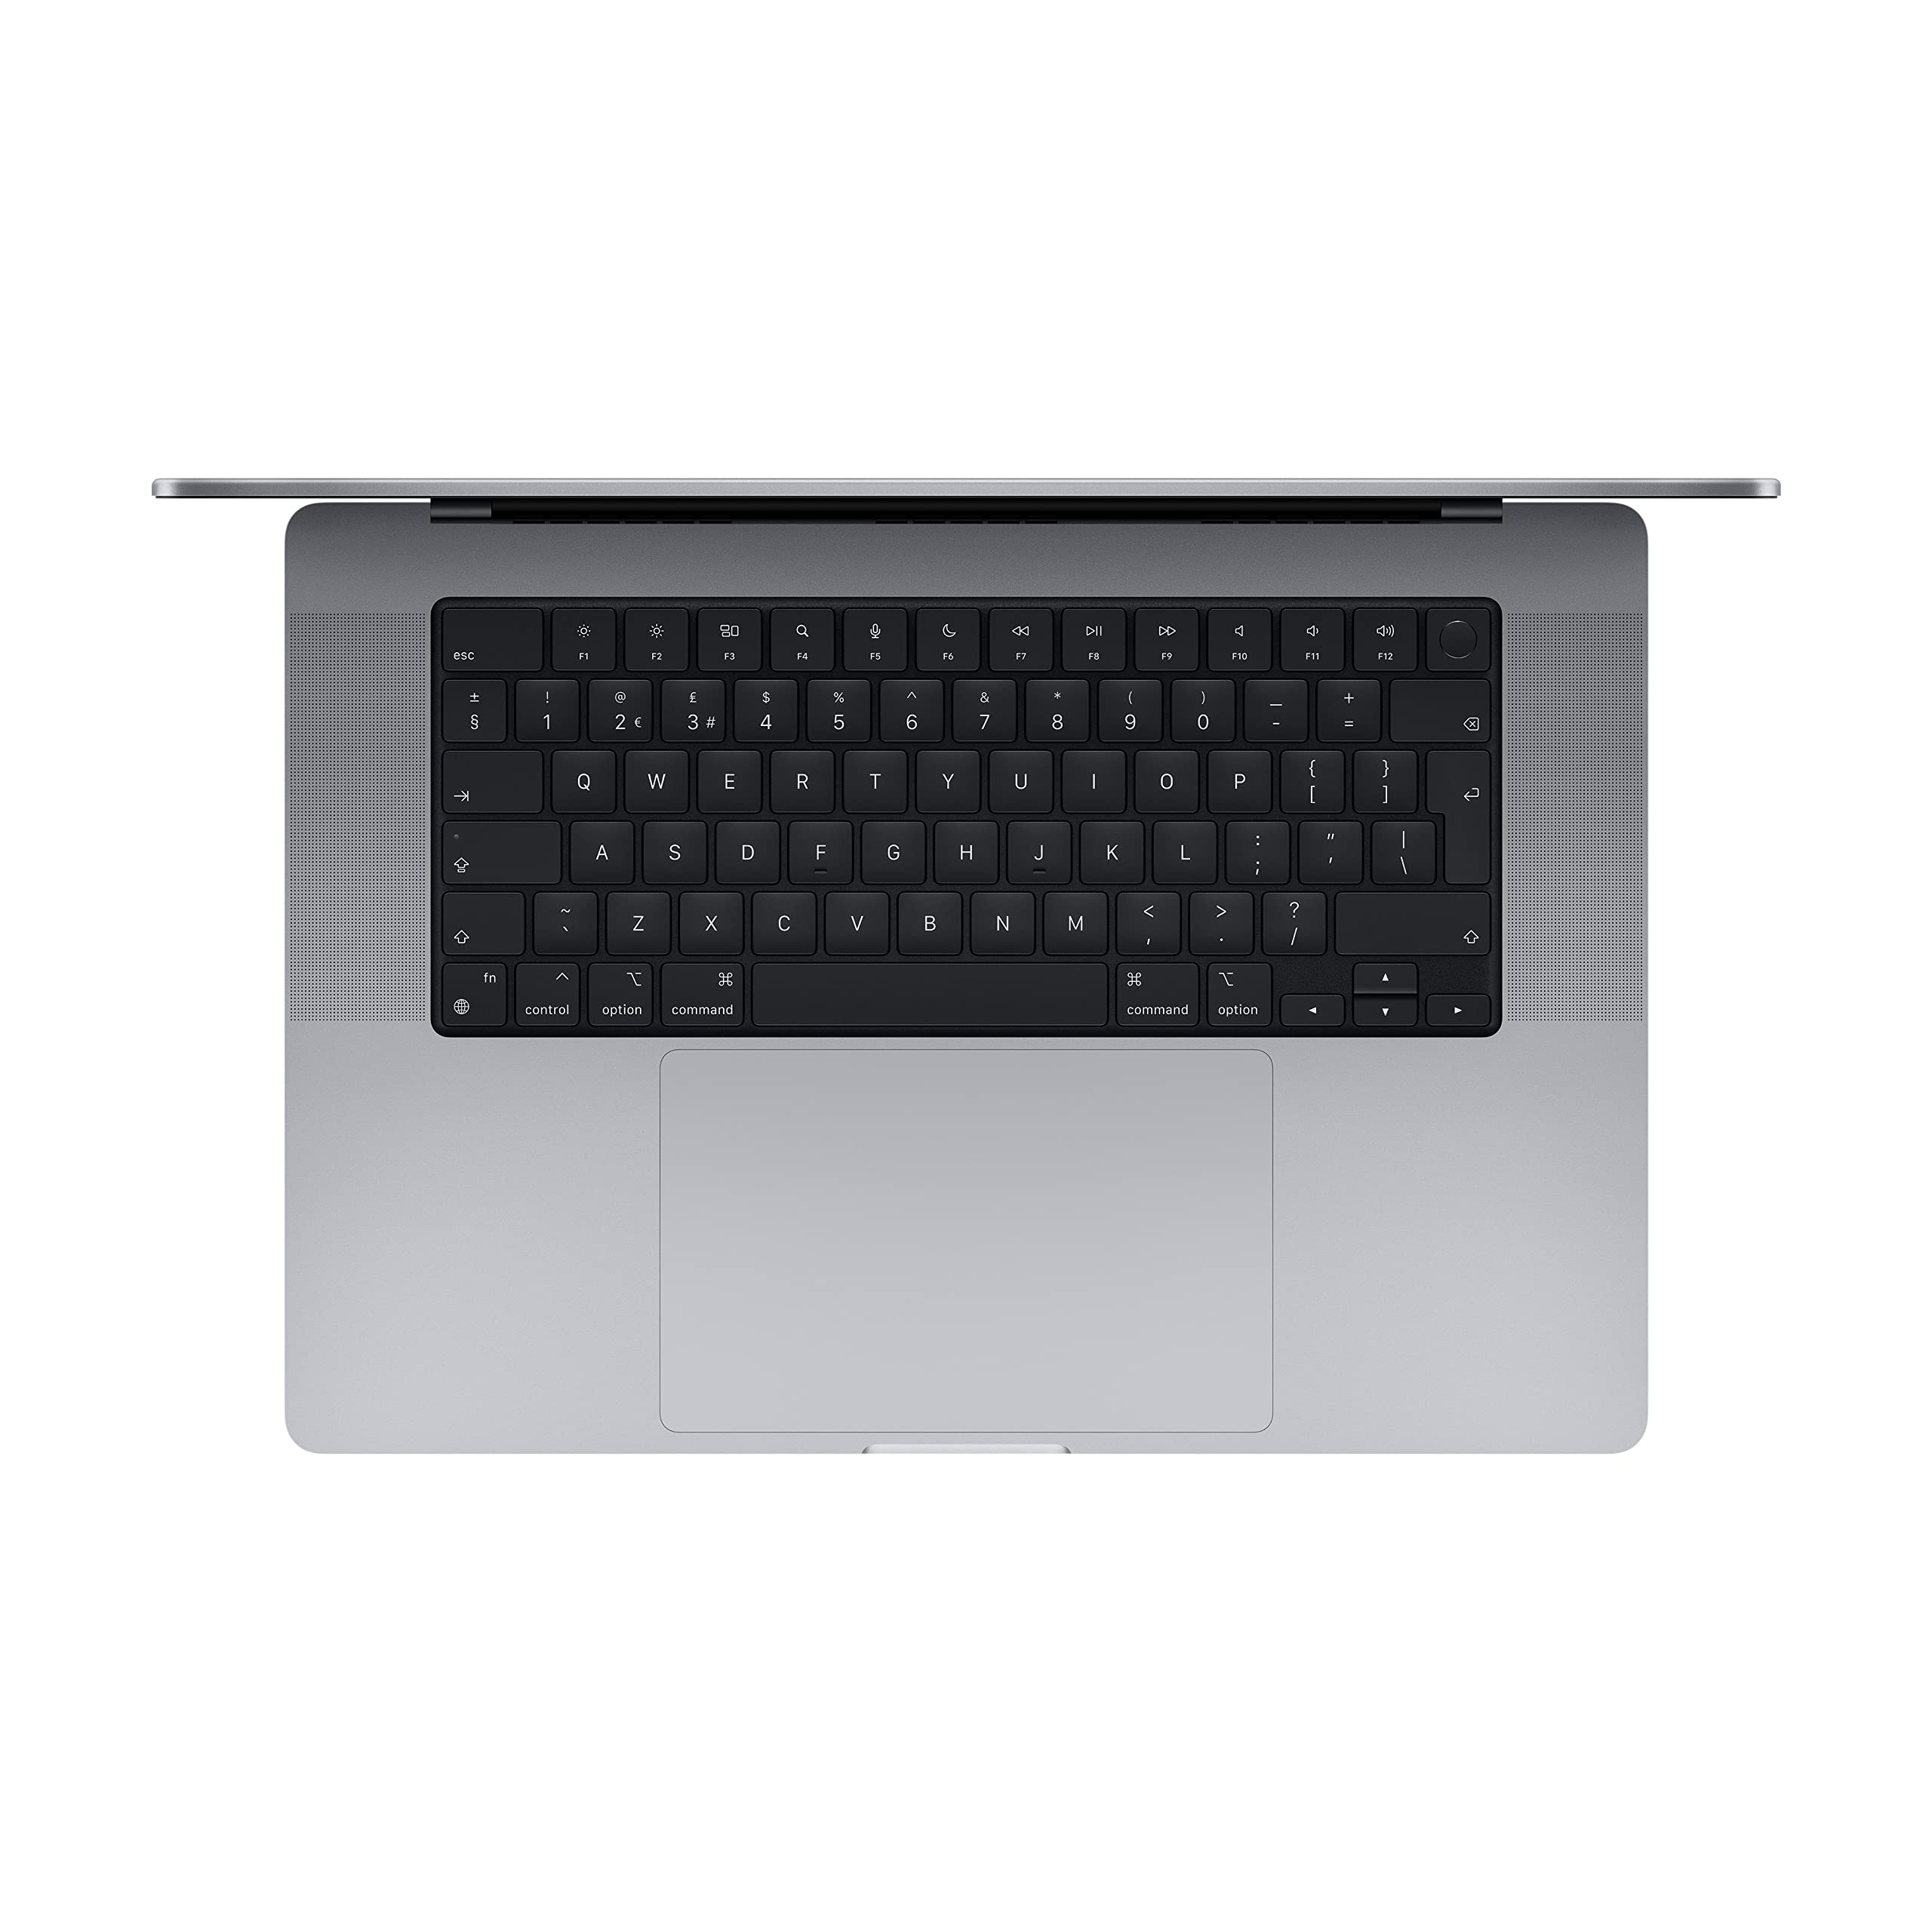 2021 Apple MacBook Pro (16-inch, Apple M1 Pro chip with 10‑core CPU and 16‑core GPU, 16GB RAM, 1TB SSD) - Space Grey